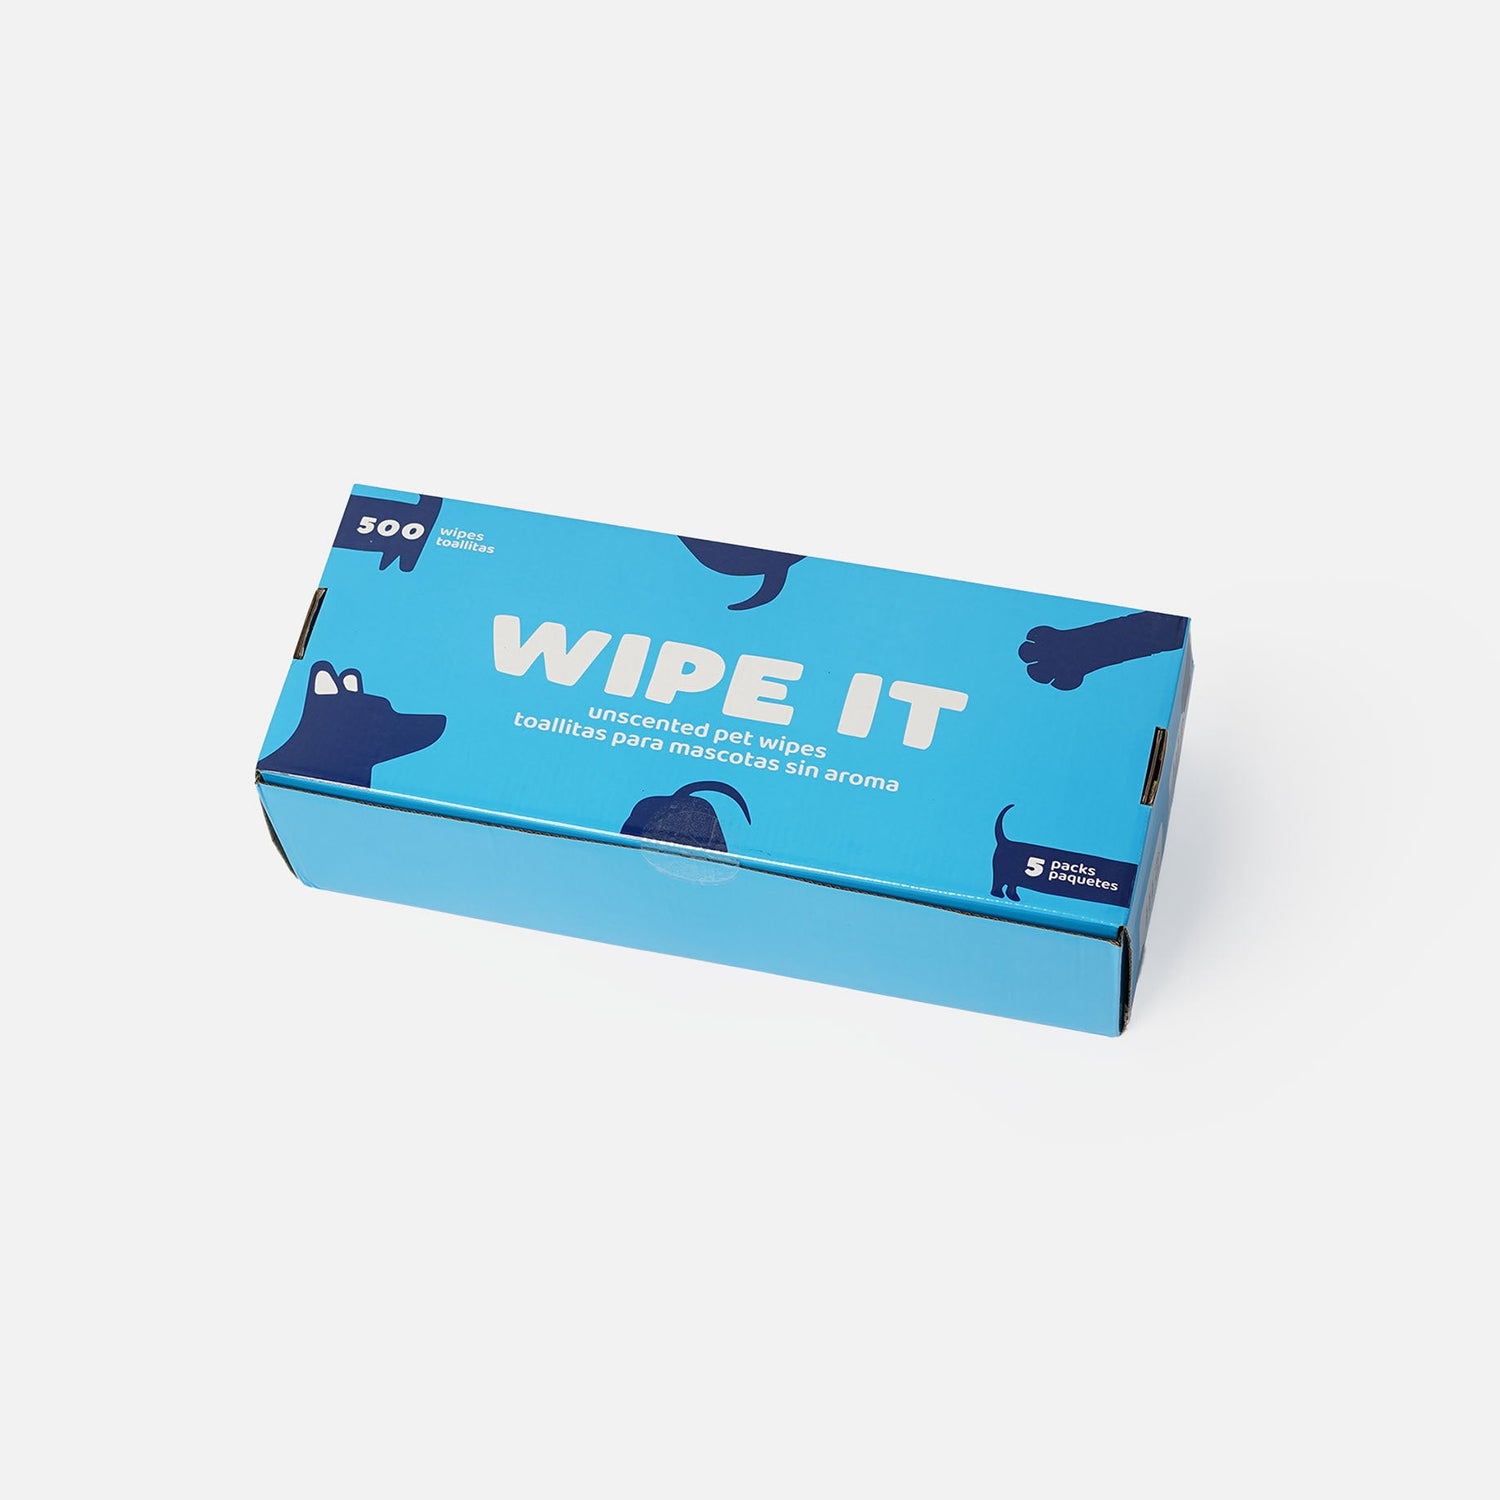 Silver Paw Wipe It - Box with 20 Tubes